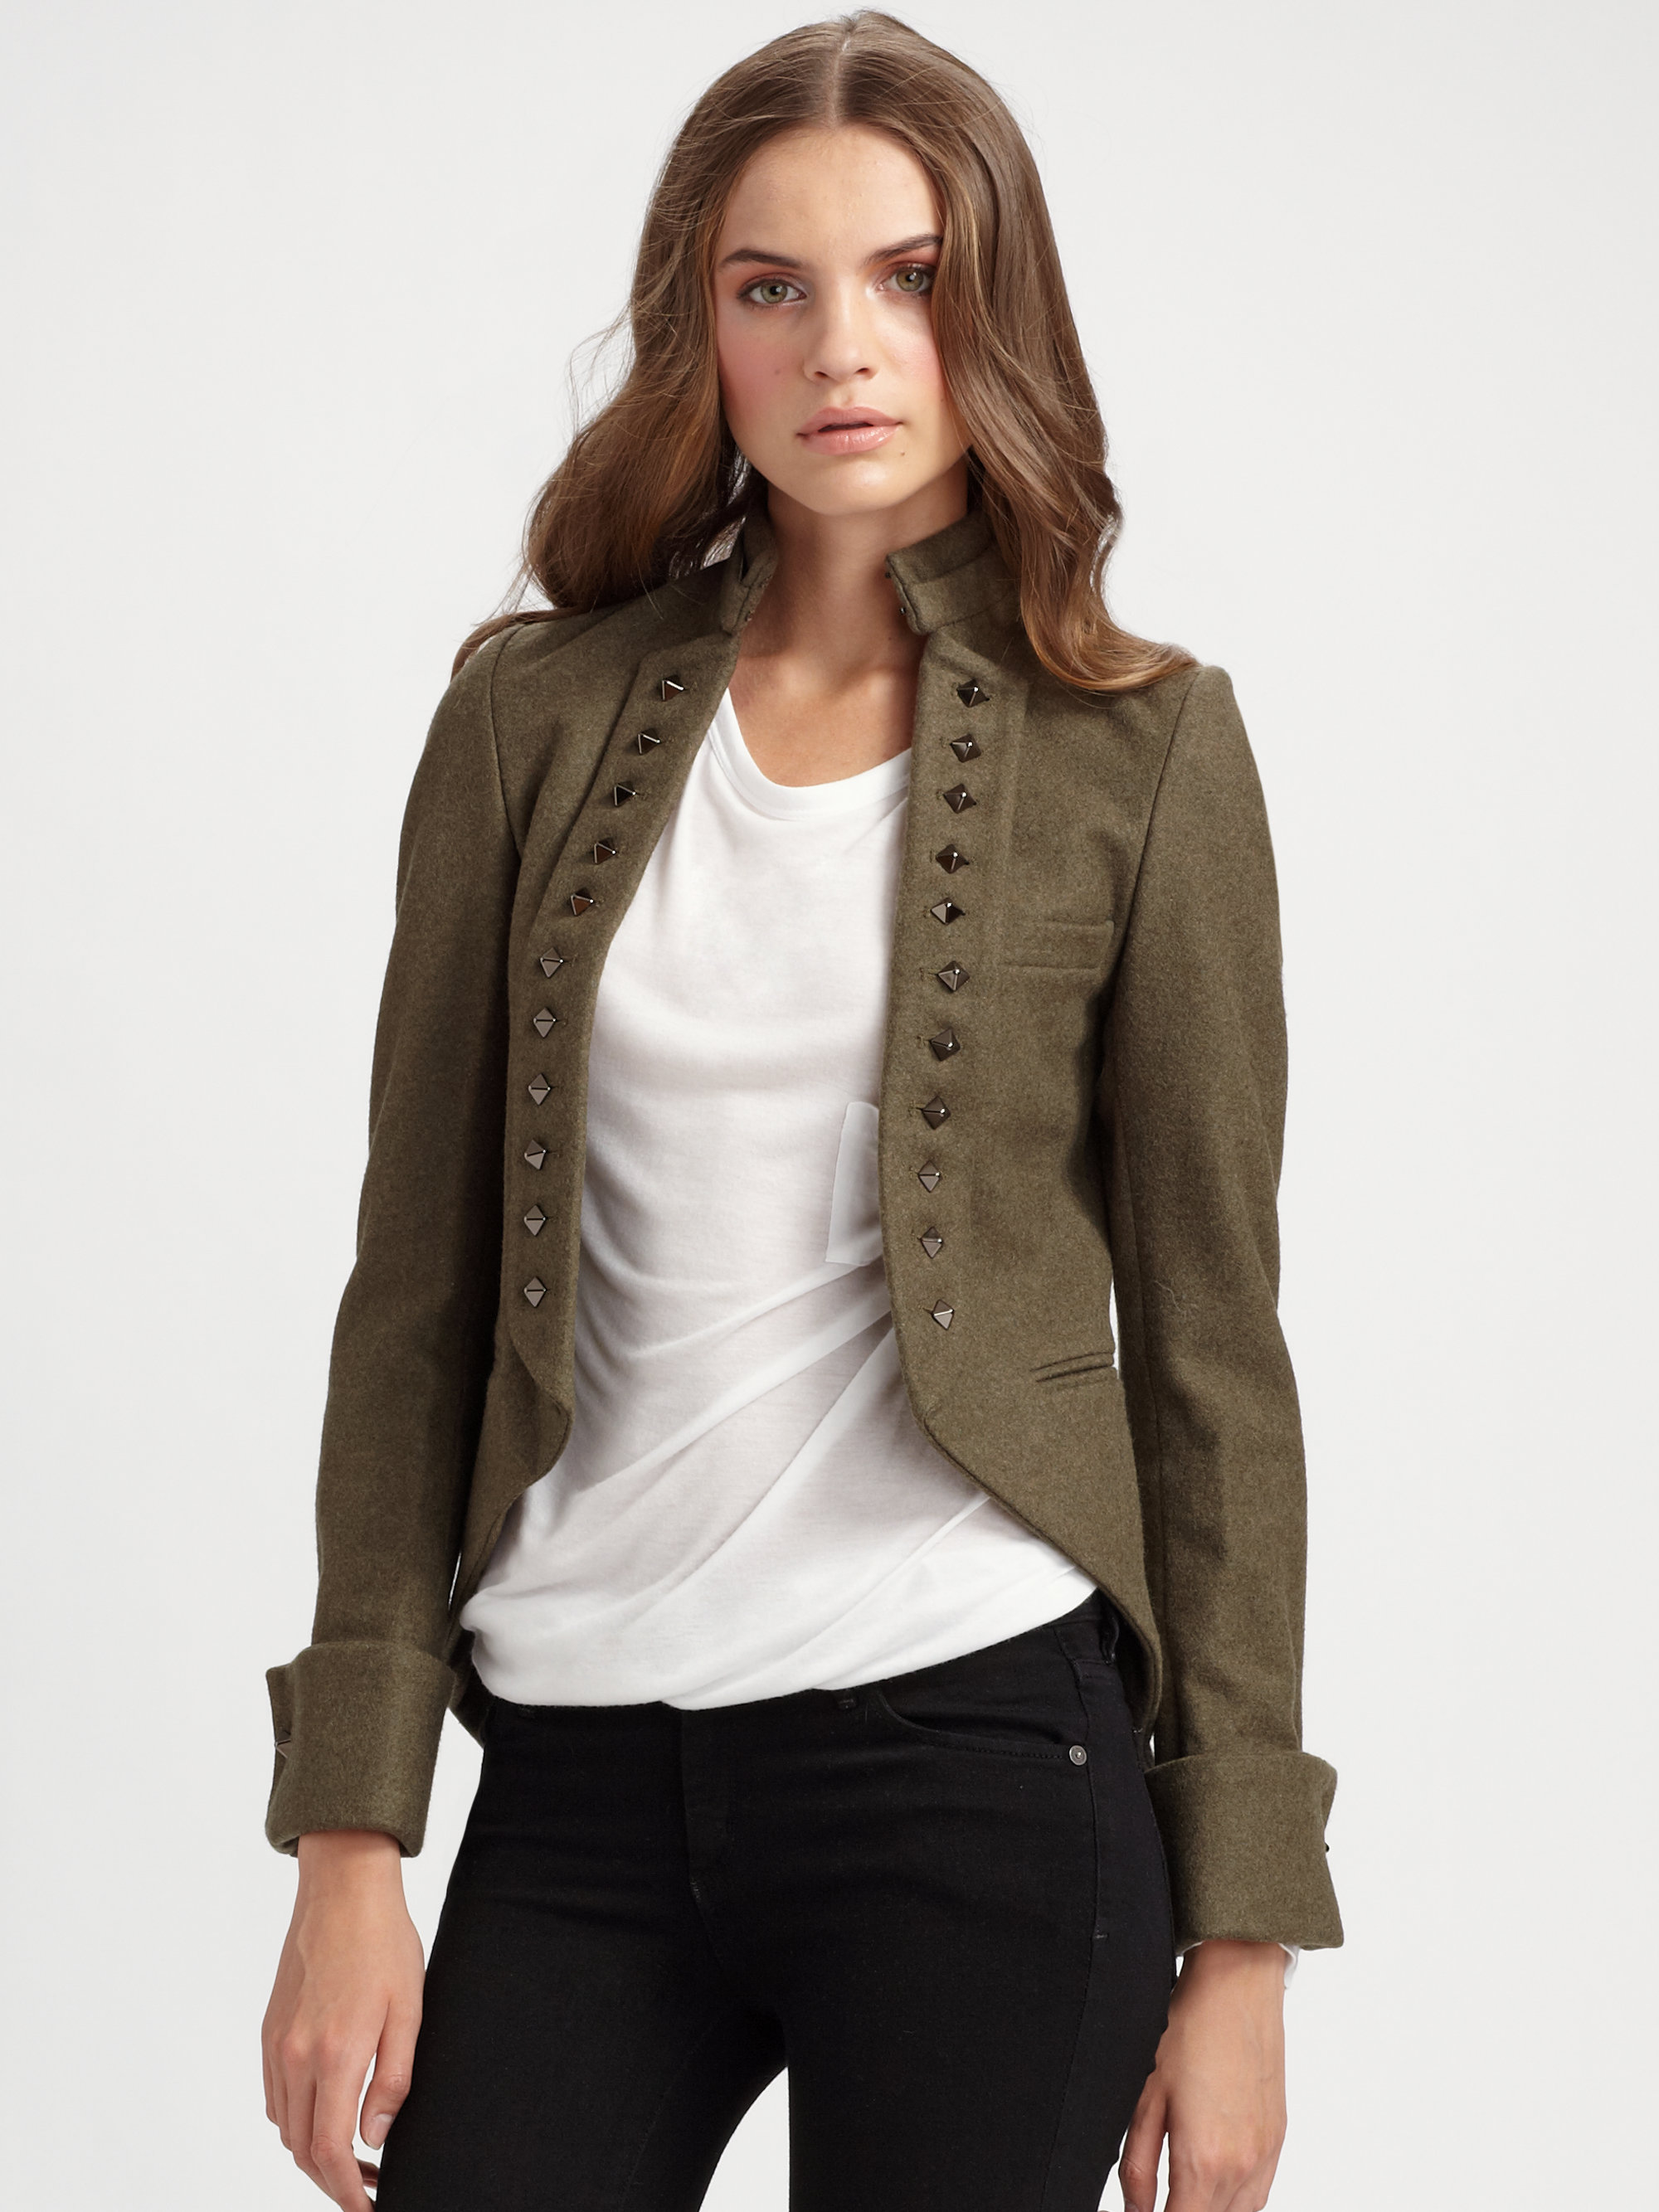 Lyst - Gryphon Band Jacket in Green